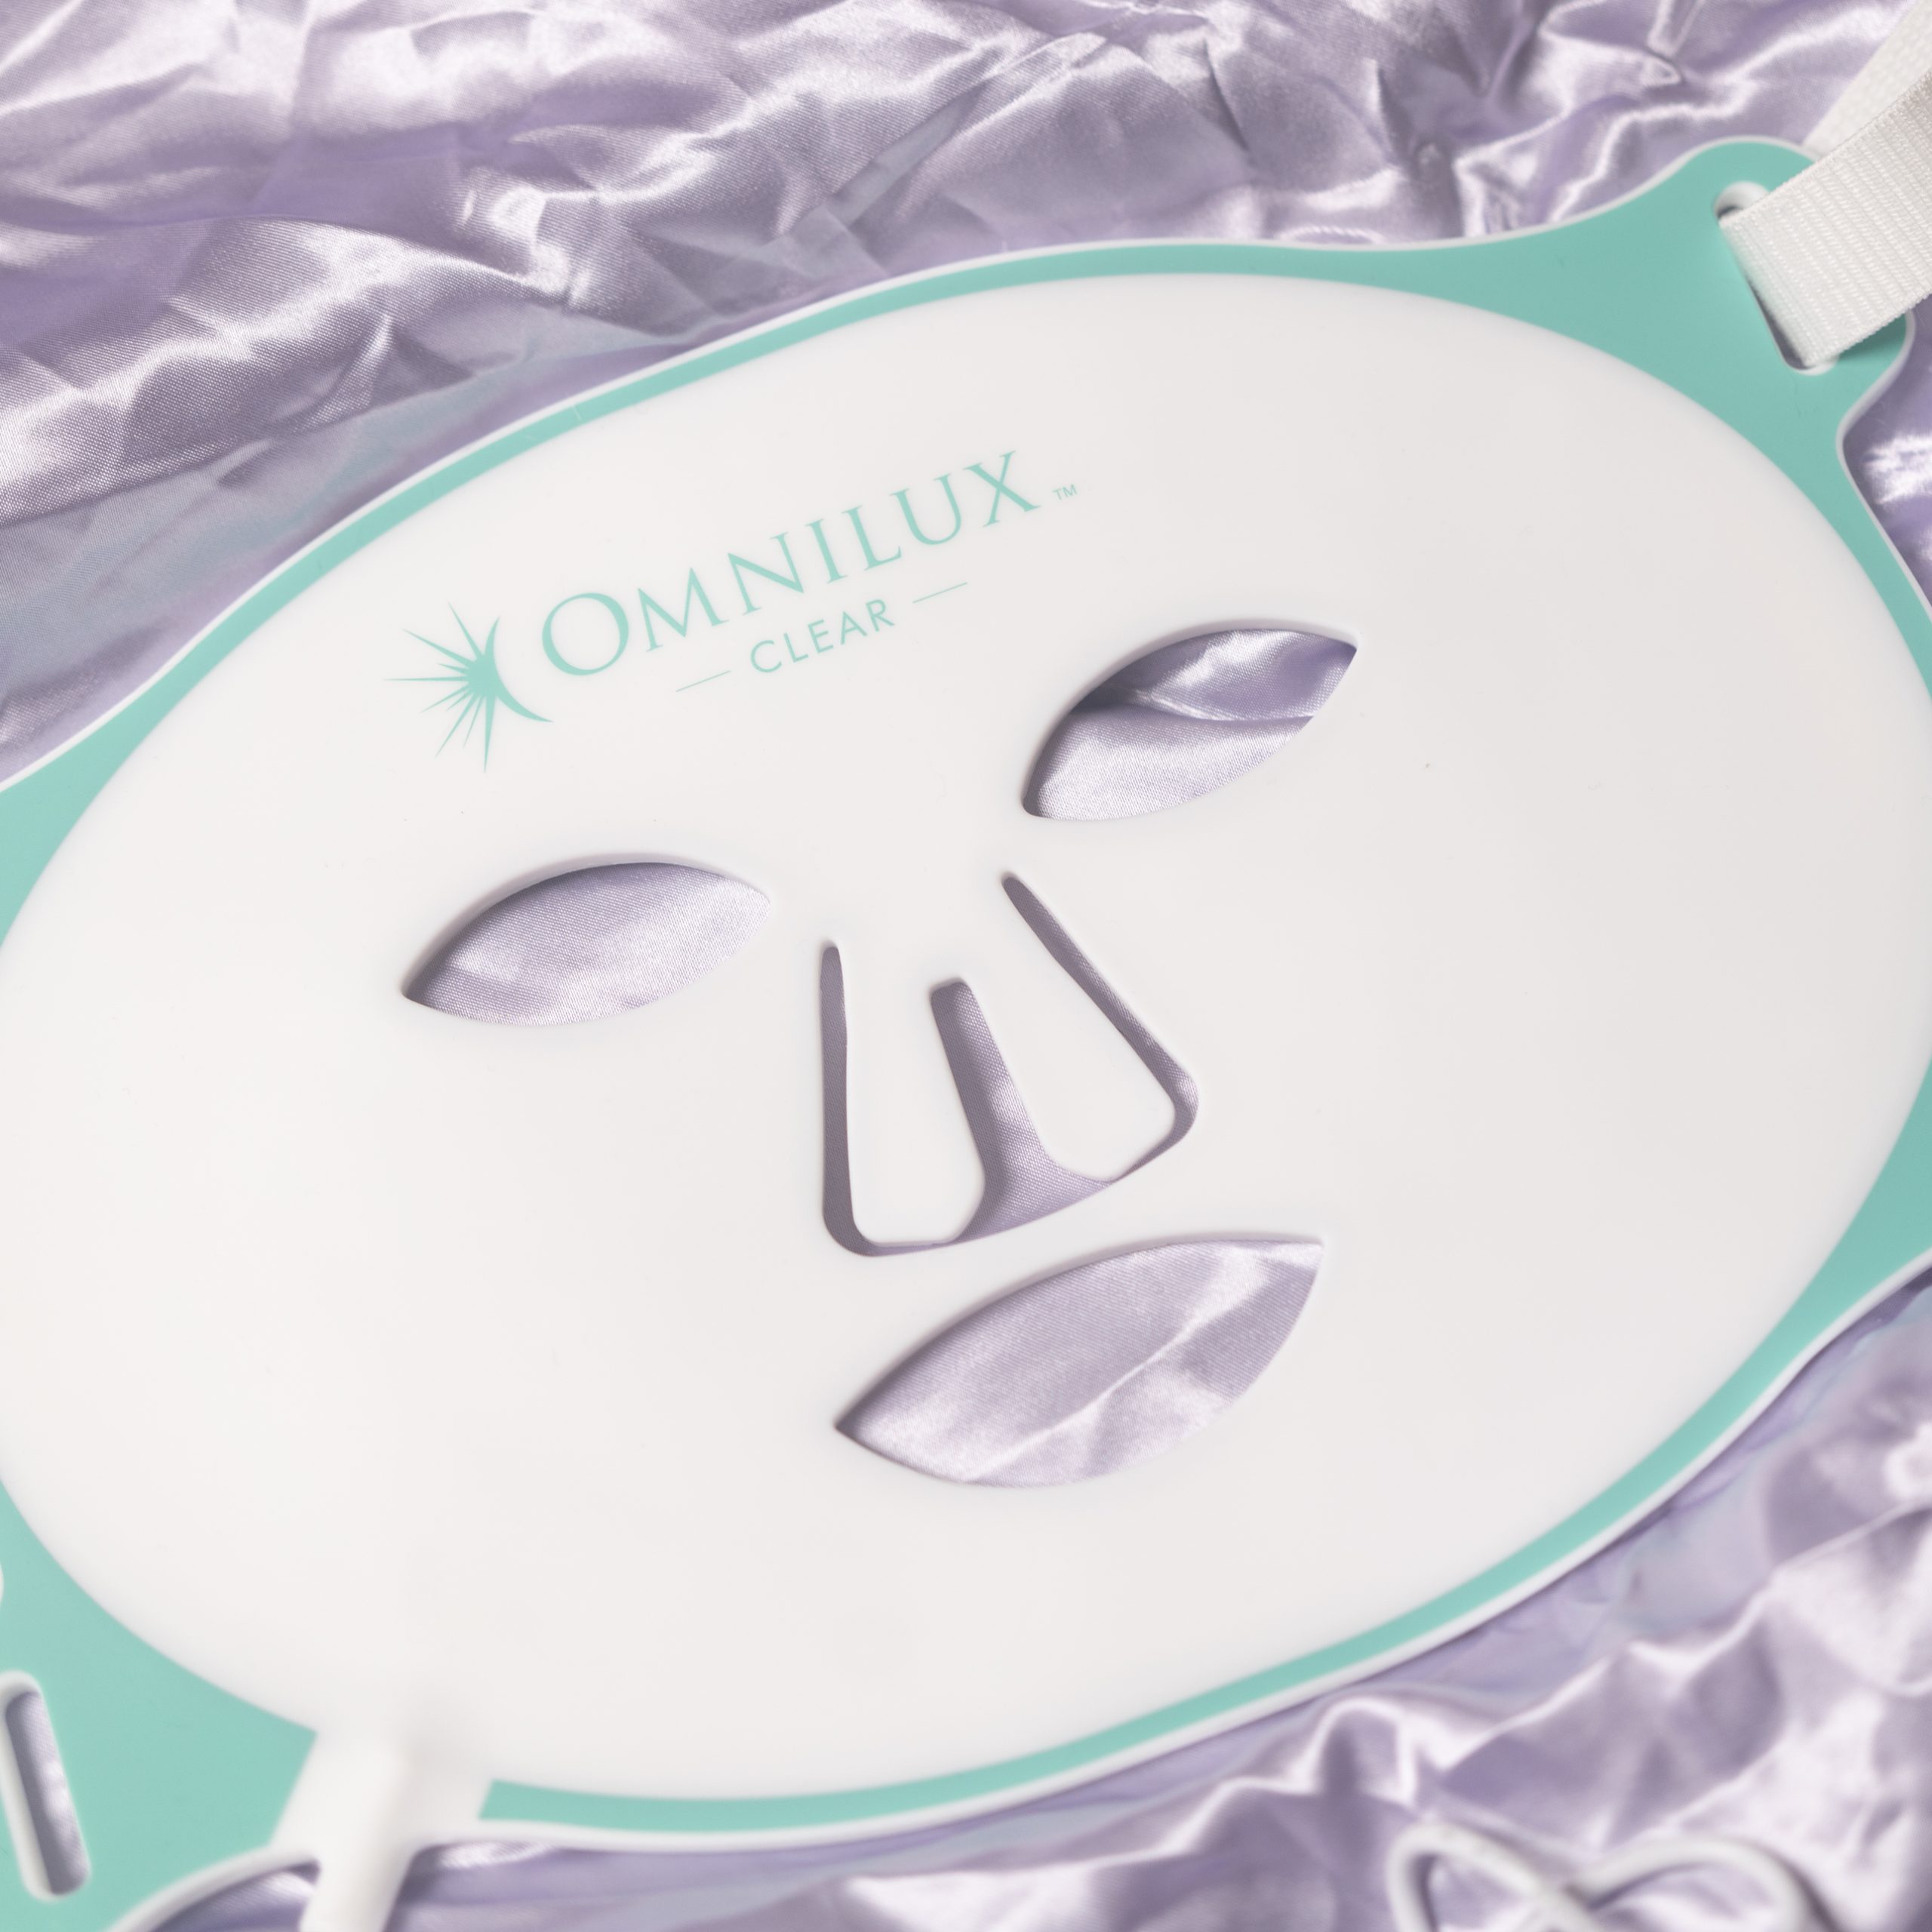 Beauty Tech: Omnilux Clear LED Face Mask (Blemish Busters)